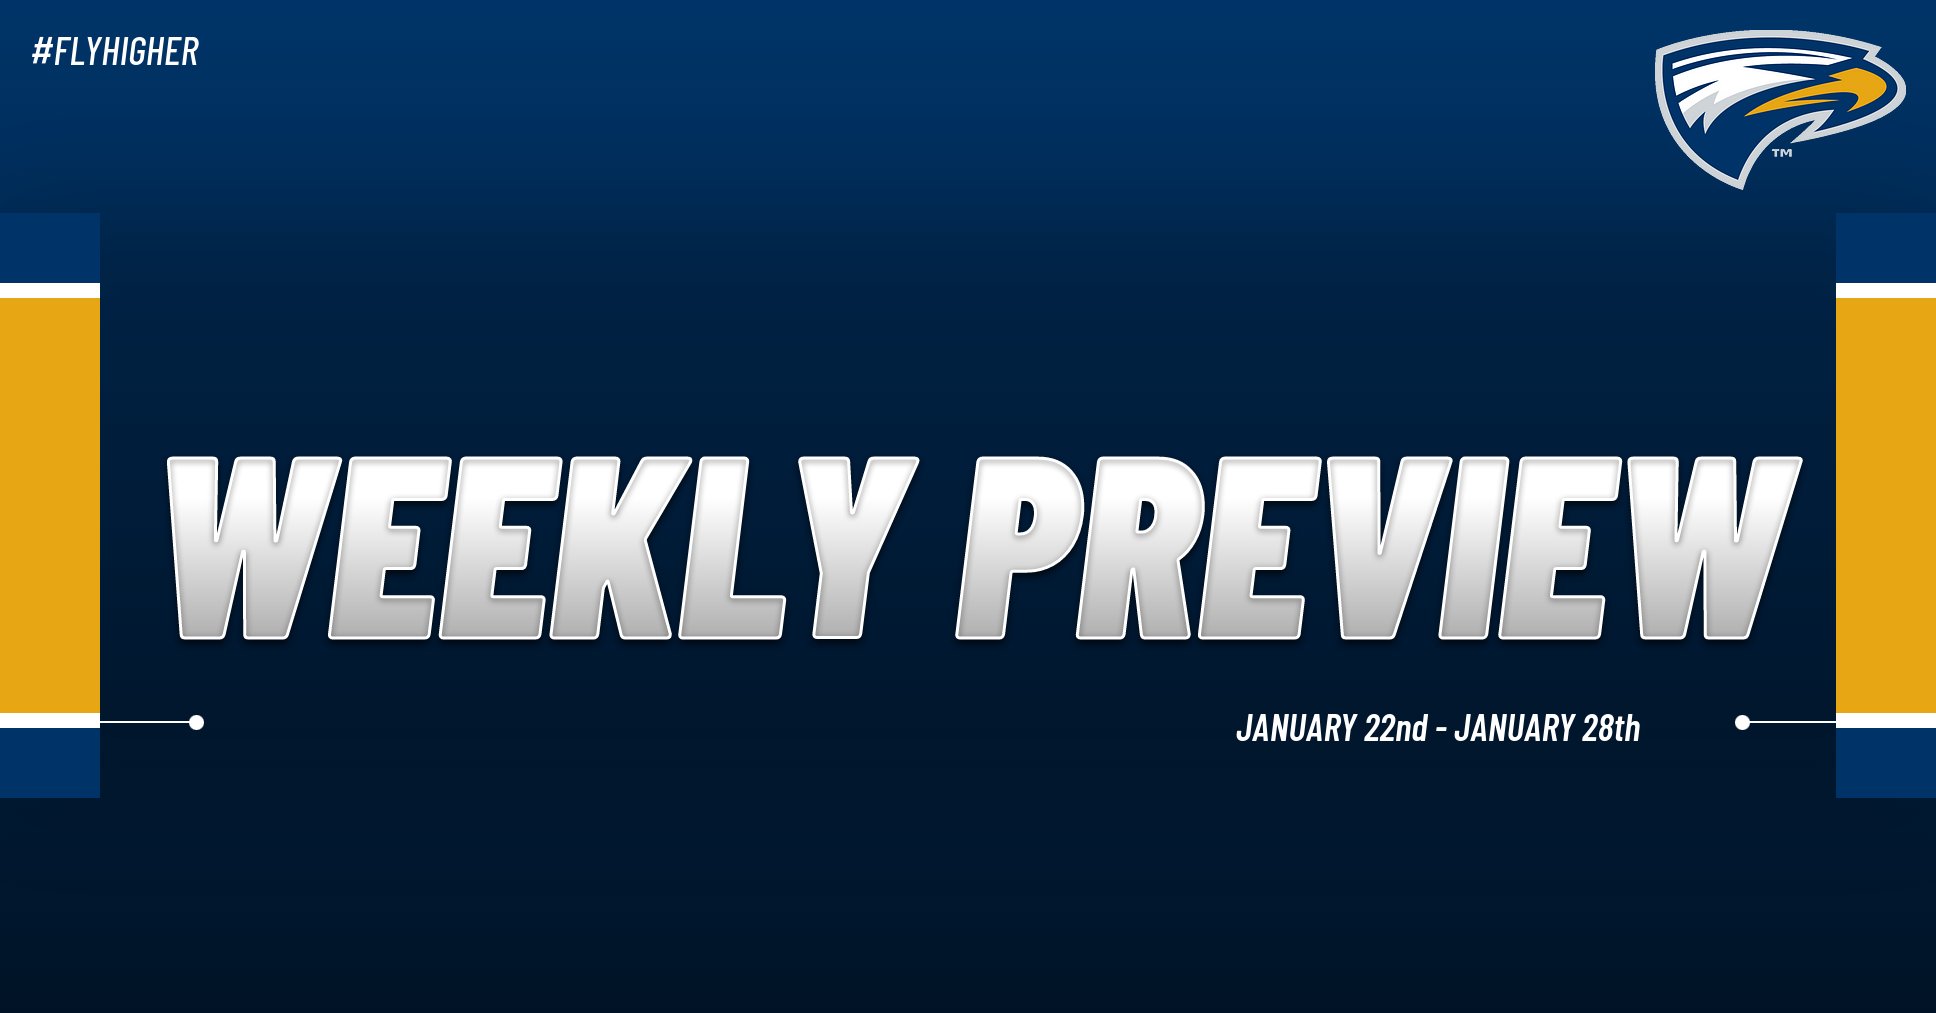 Emory Athletics Weekly Preview: January 22nd - January 28th